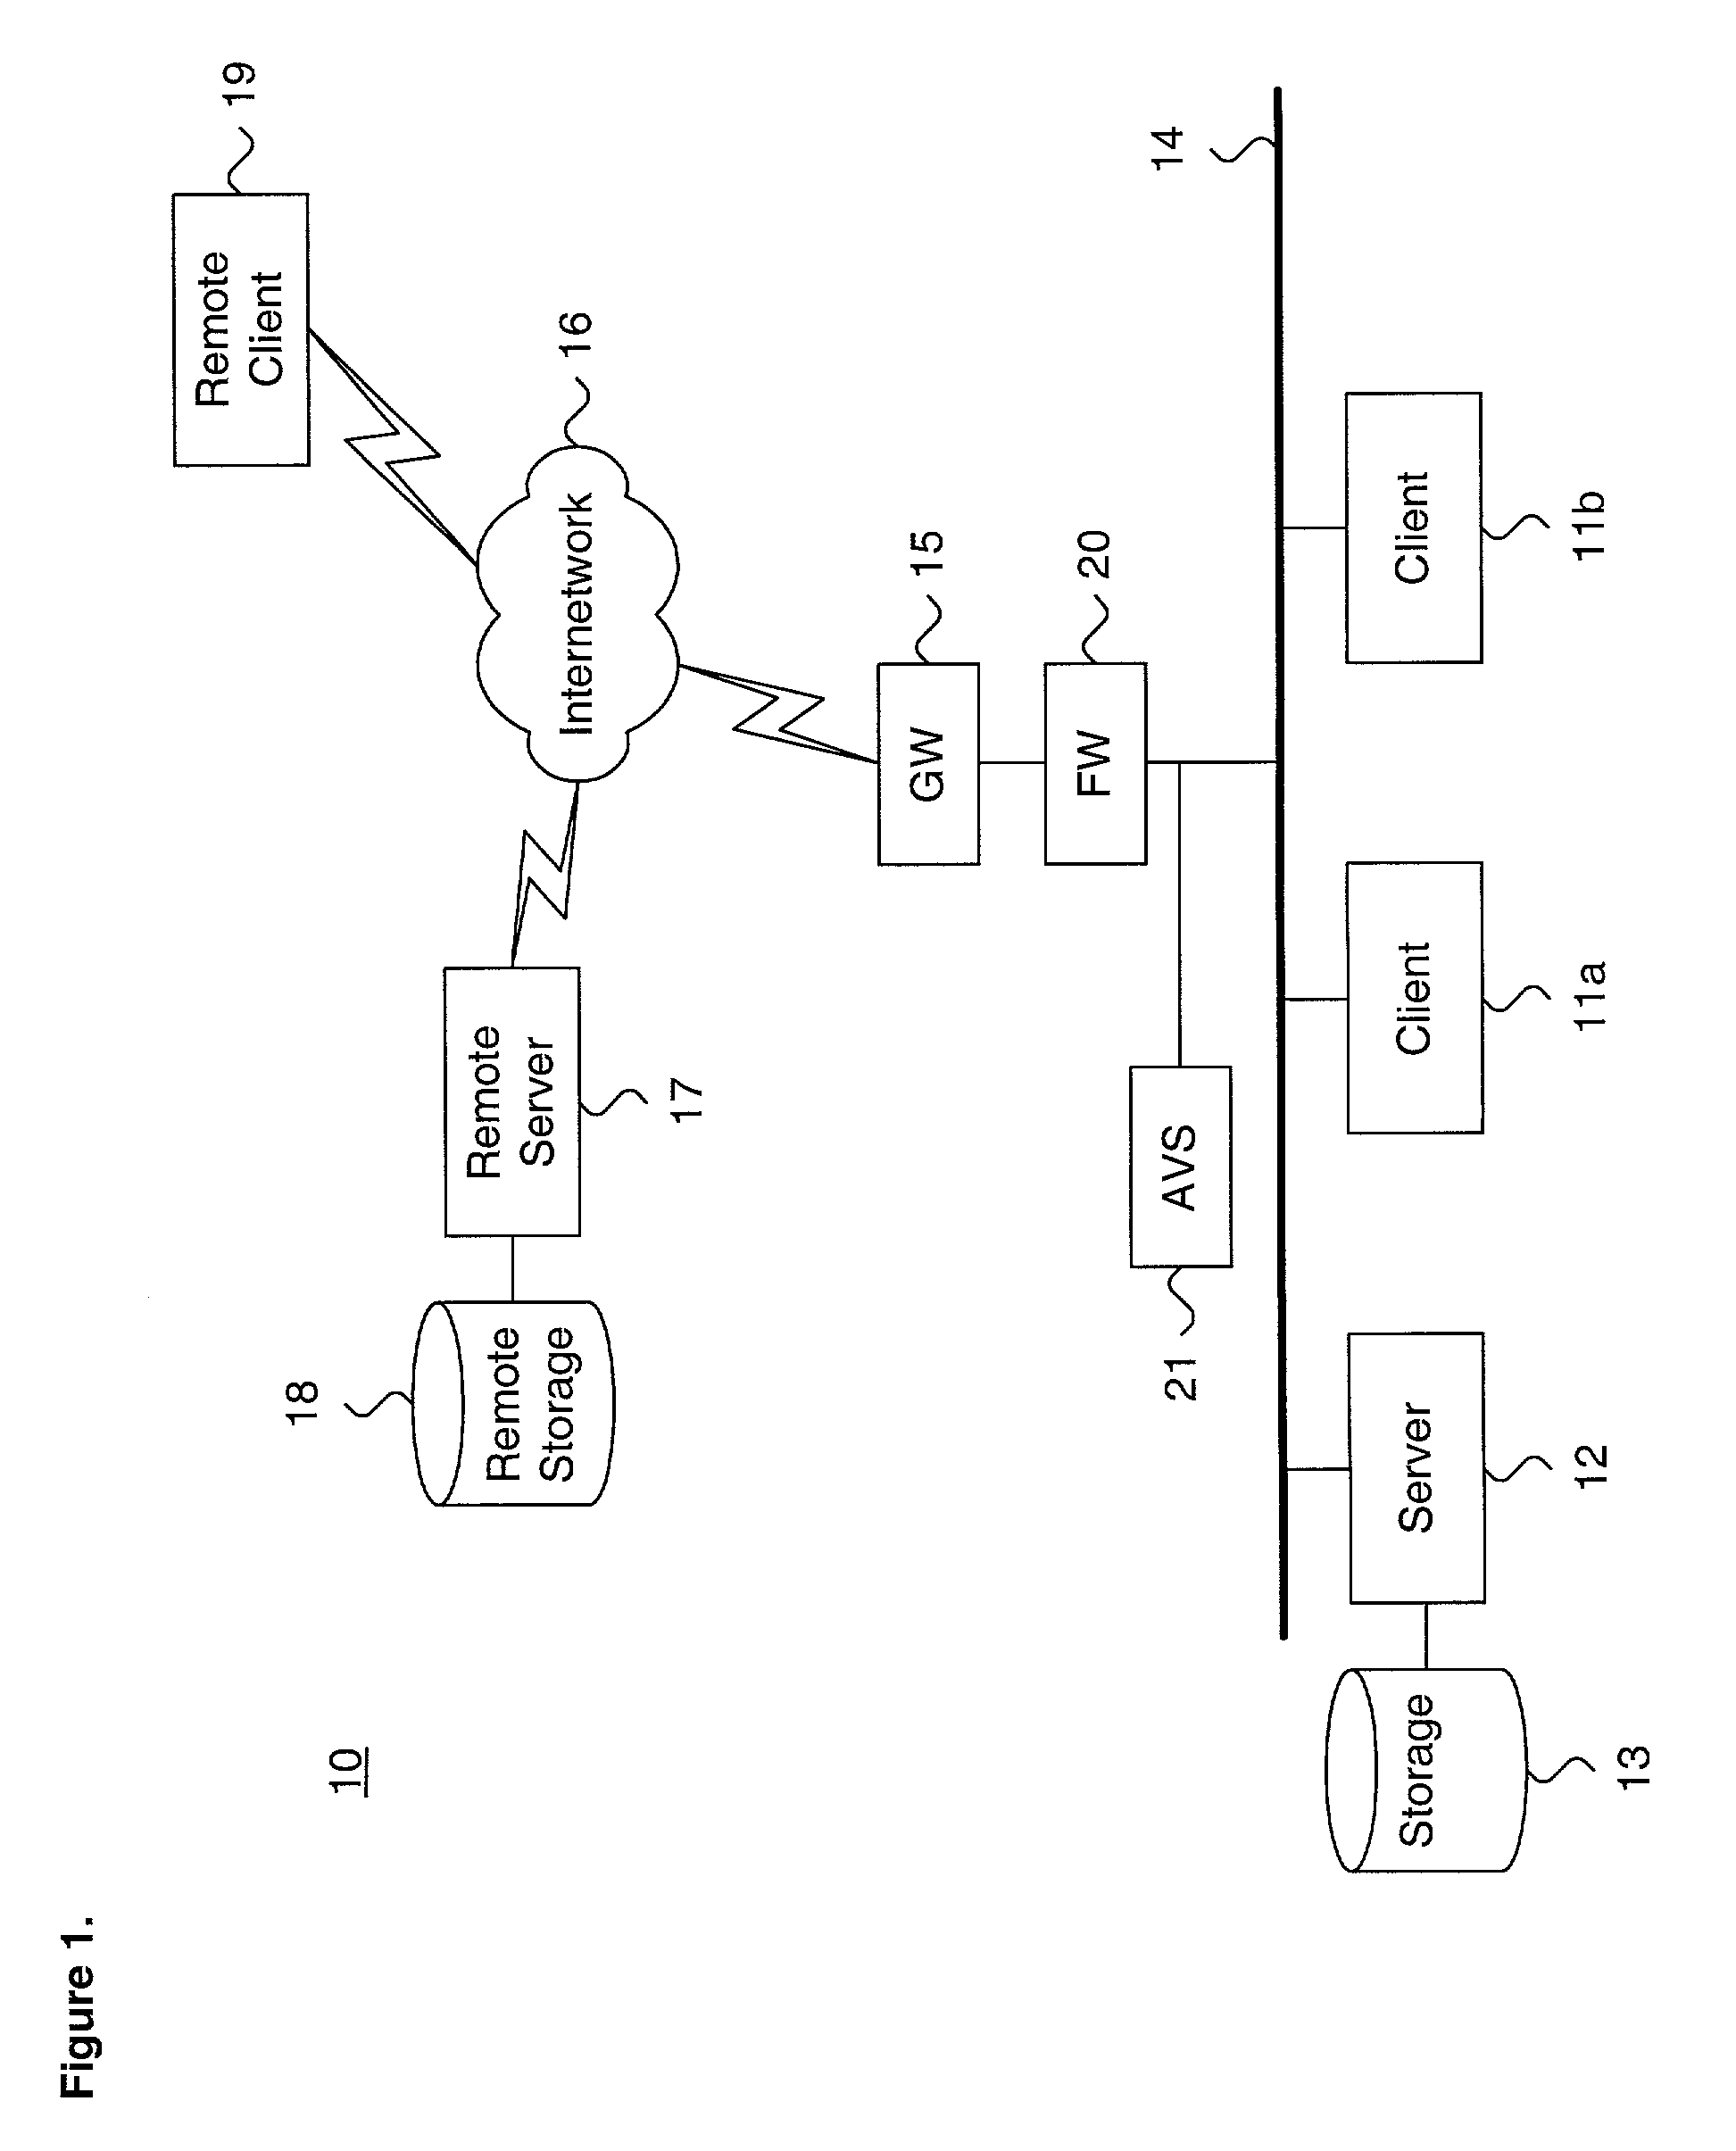 System and method for providing passive screening of transient messages in a distributed computing environment